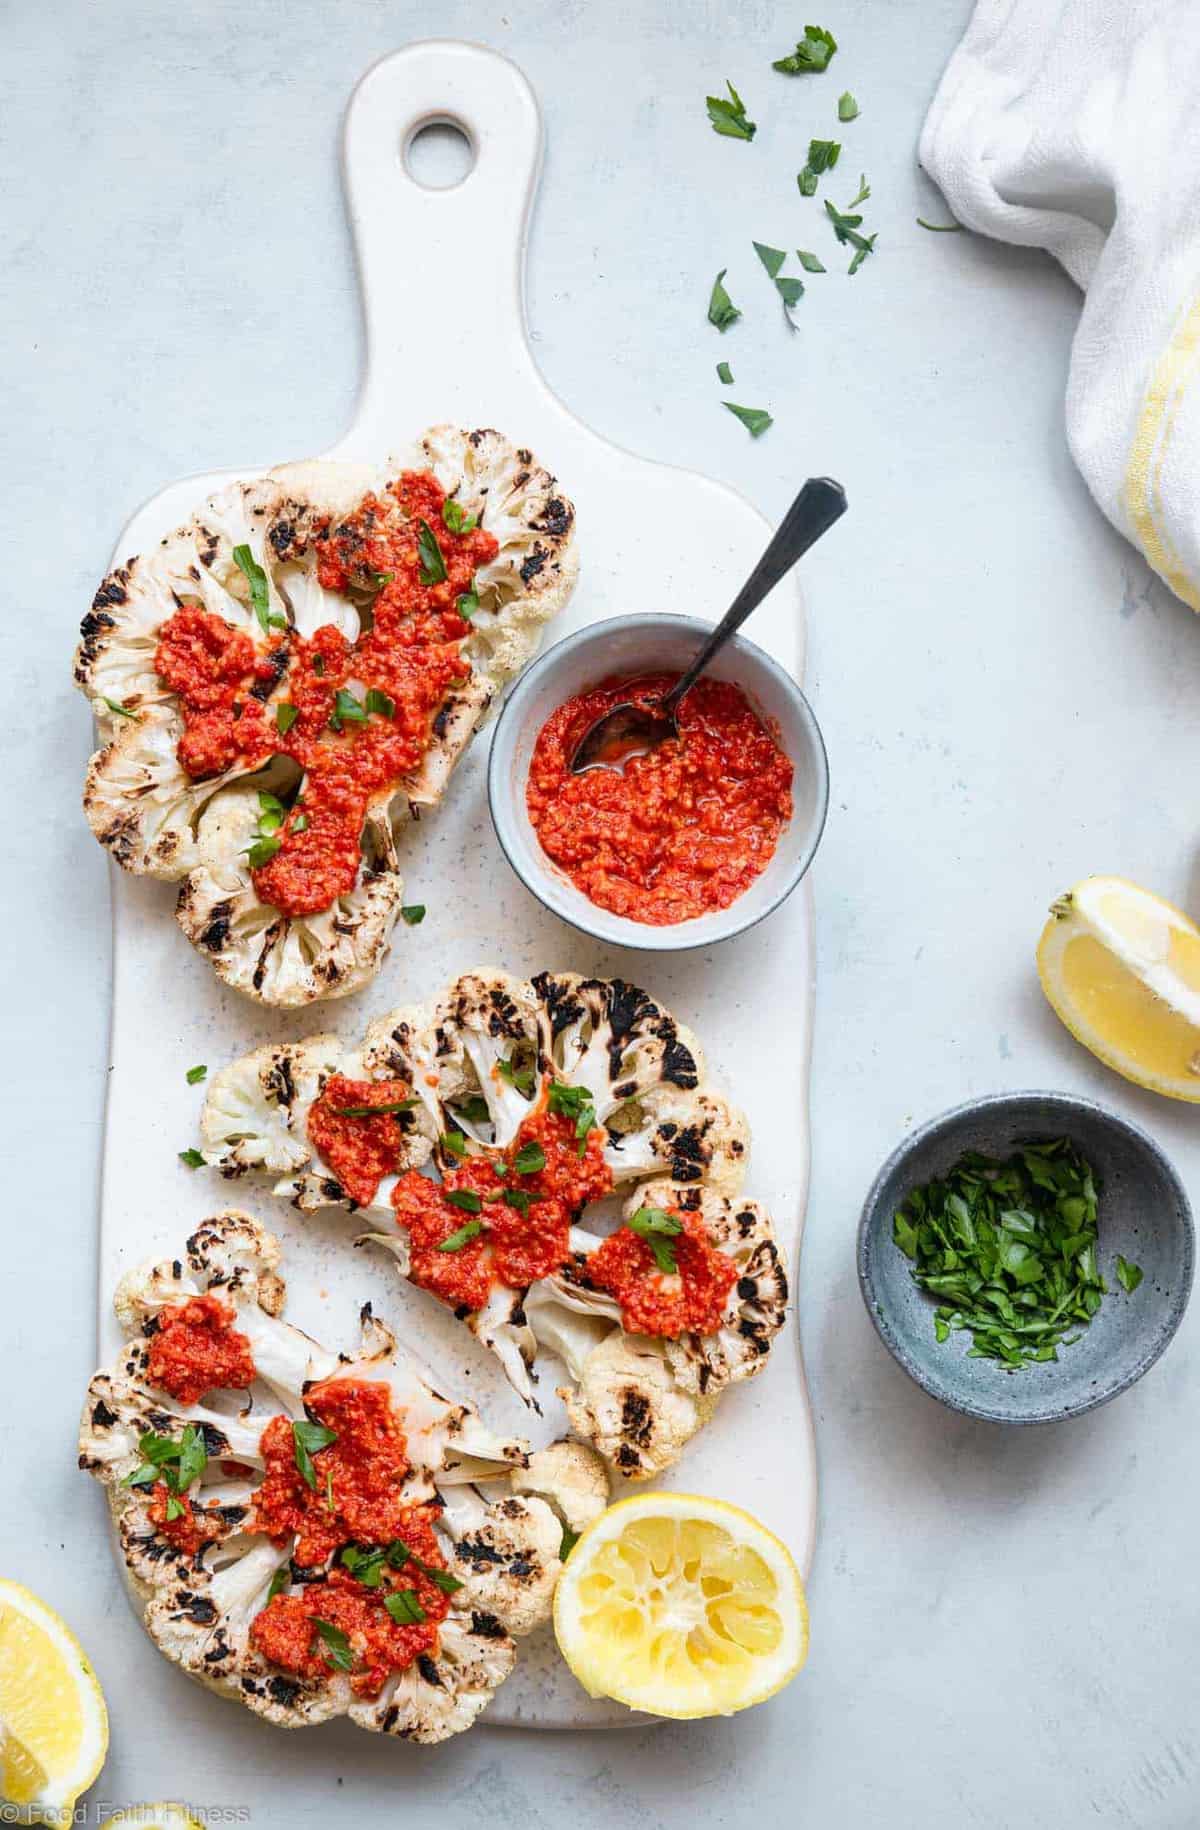 Grilled cauliflower steak laying on a table